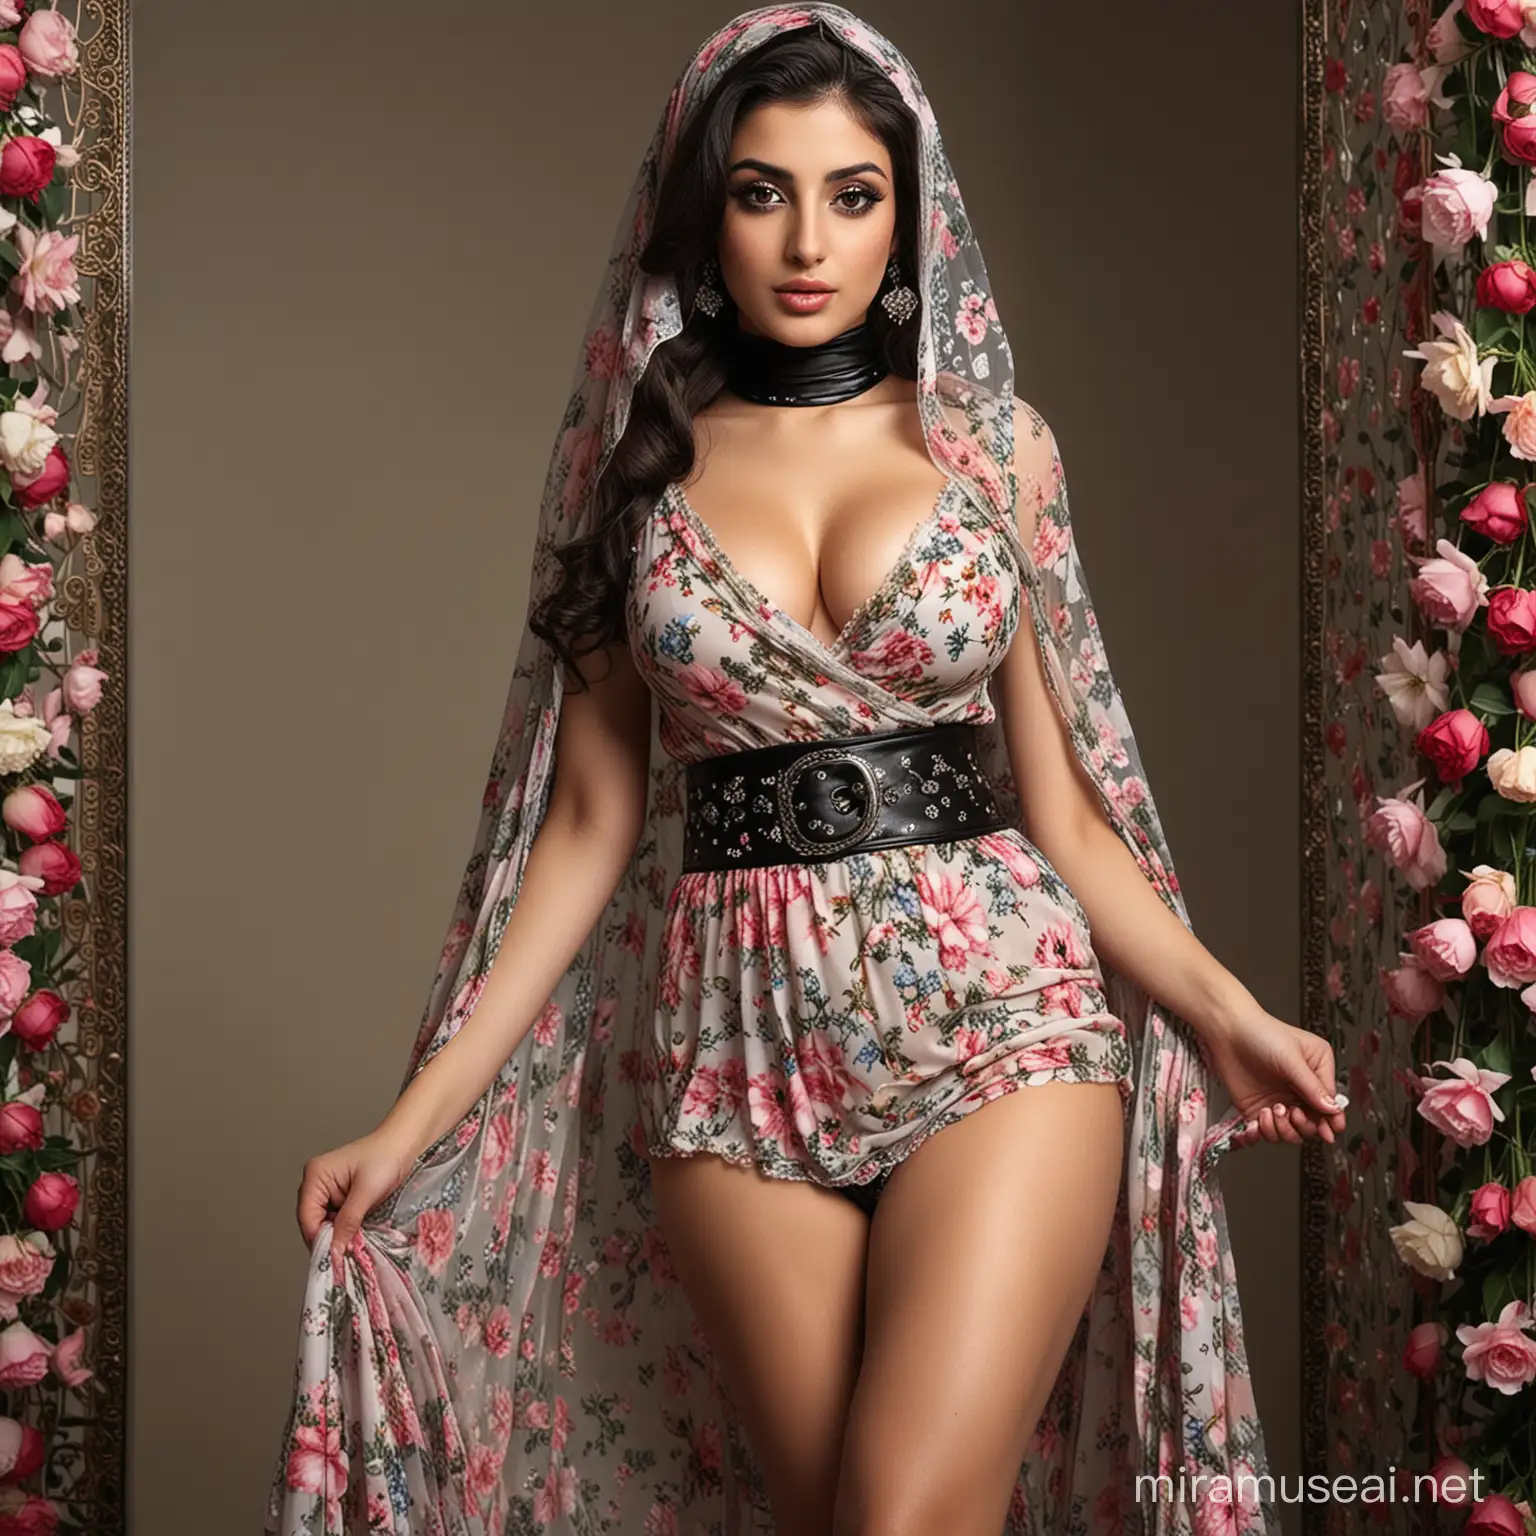 Elegant Iranian Woman in Floral Dress and Veil with Bold Features